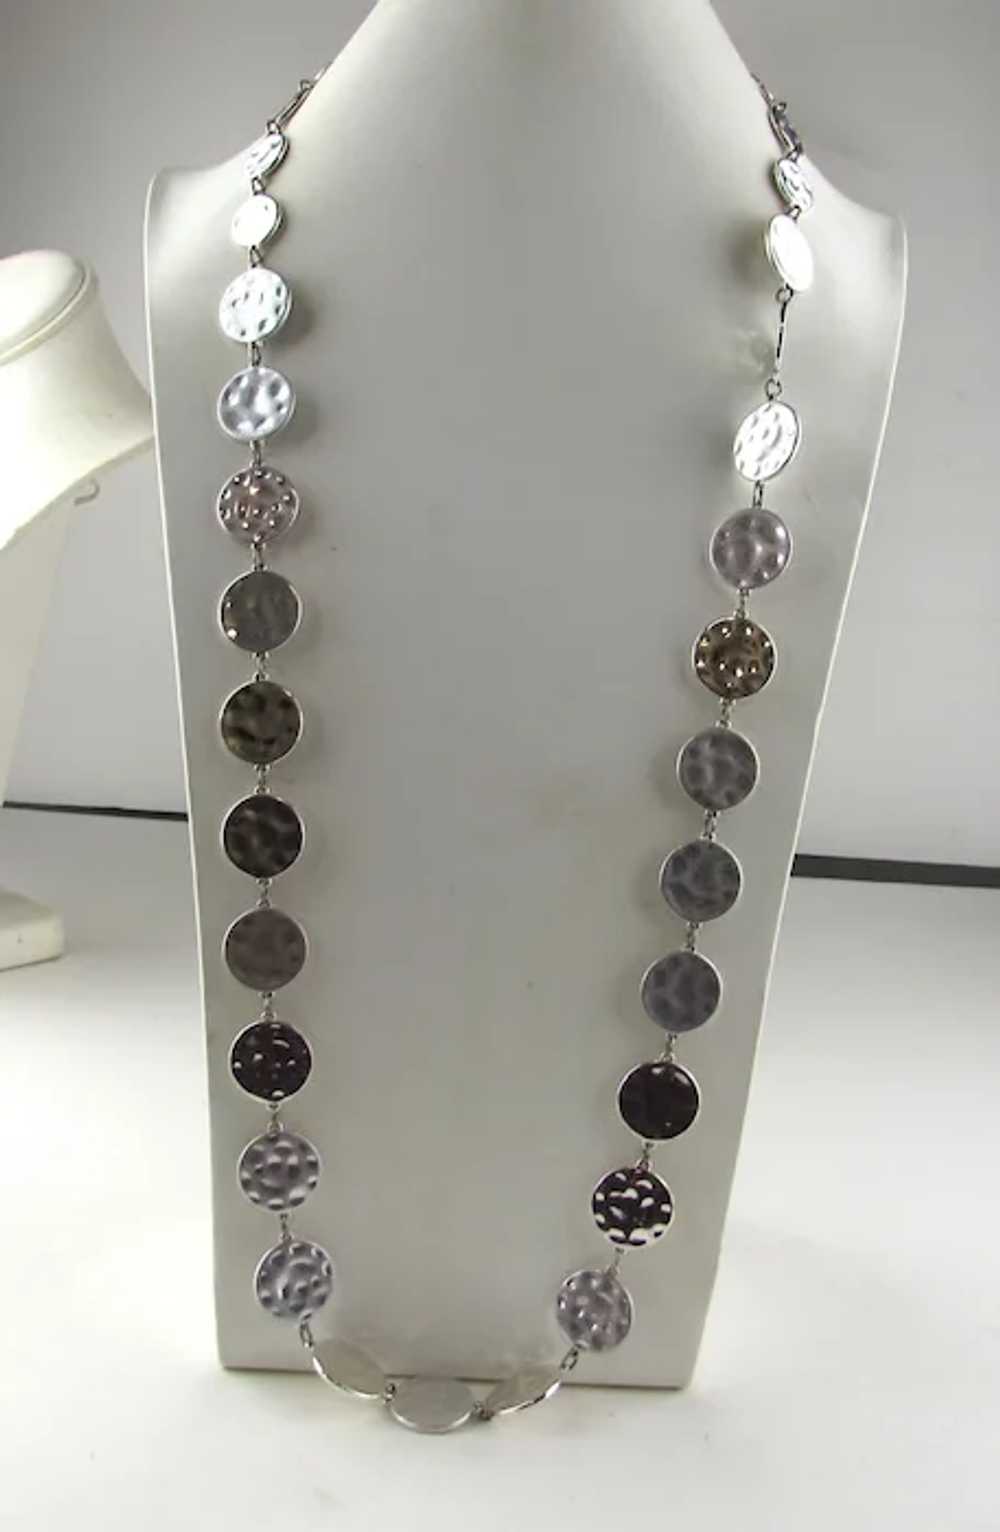 Chico Silver Tone Chain with  Textured Discs - image 9